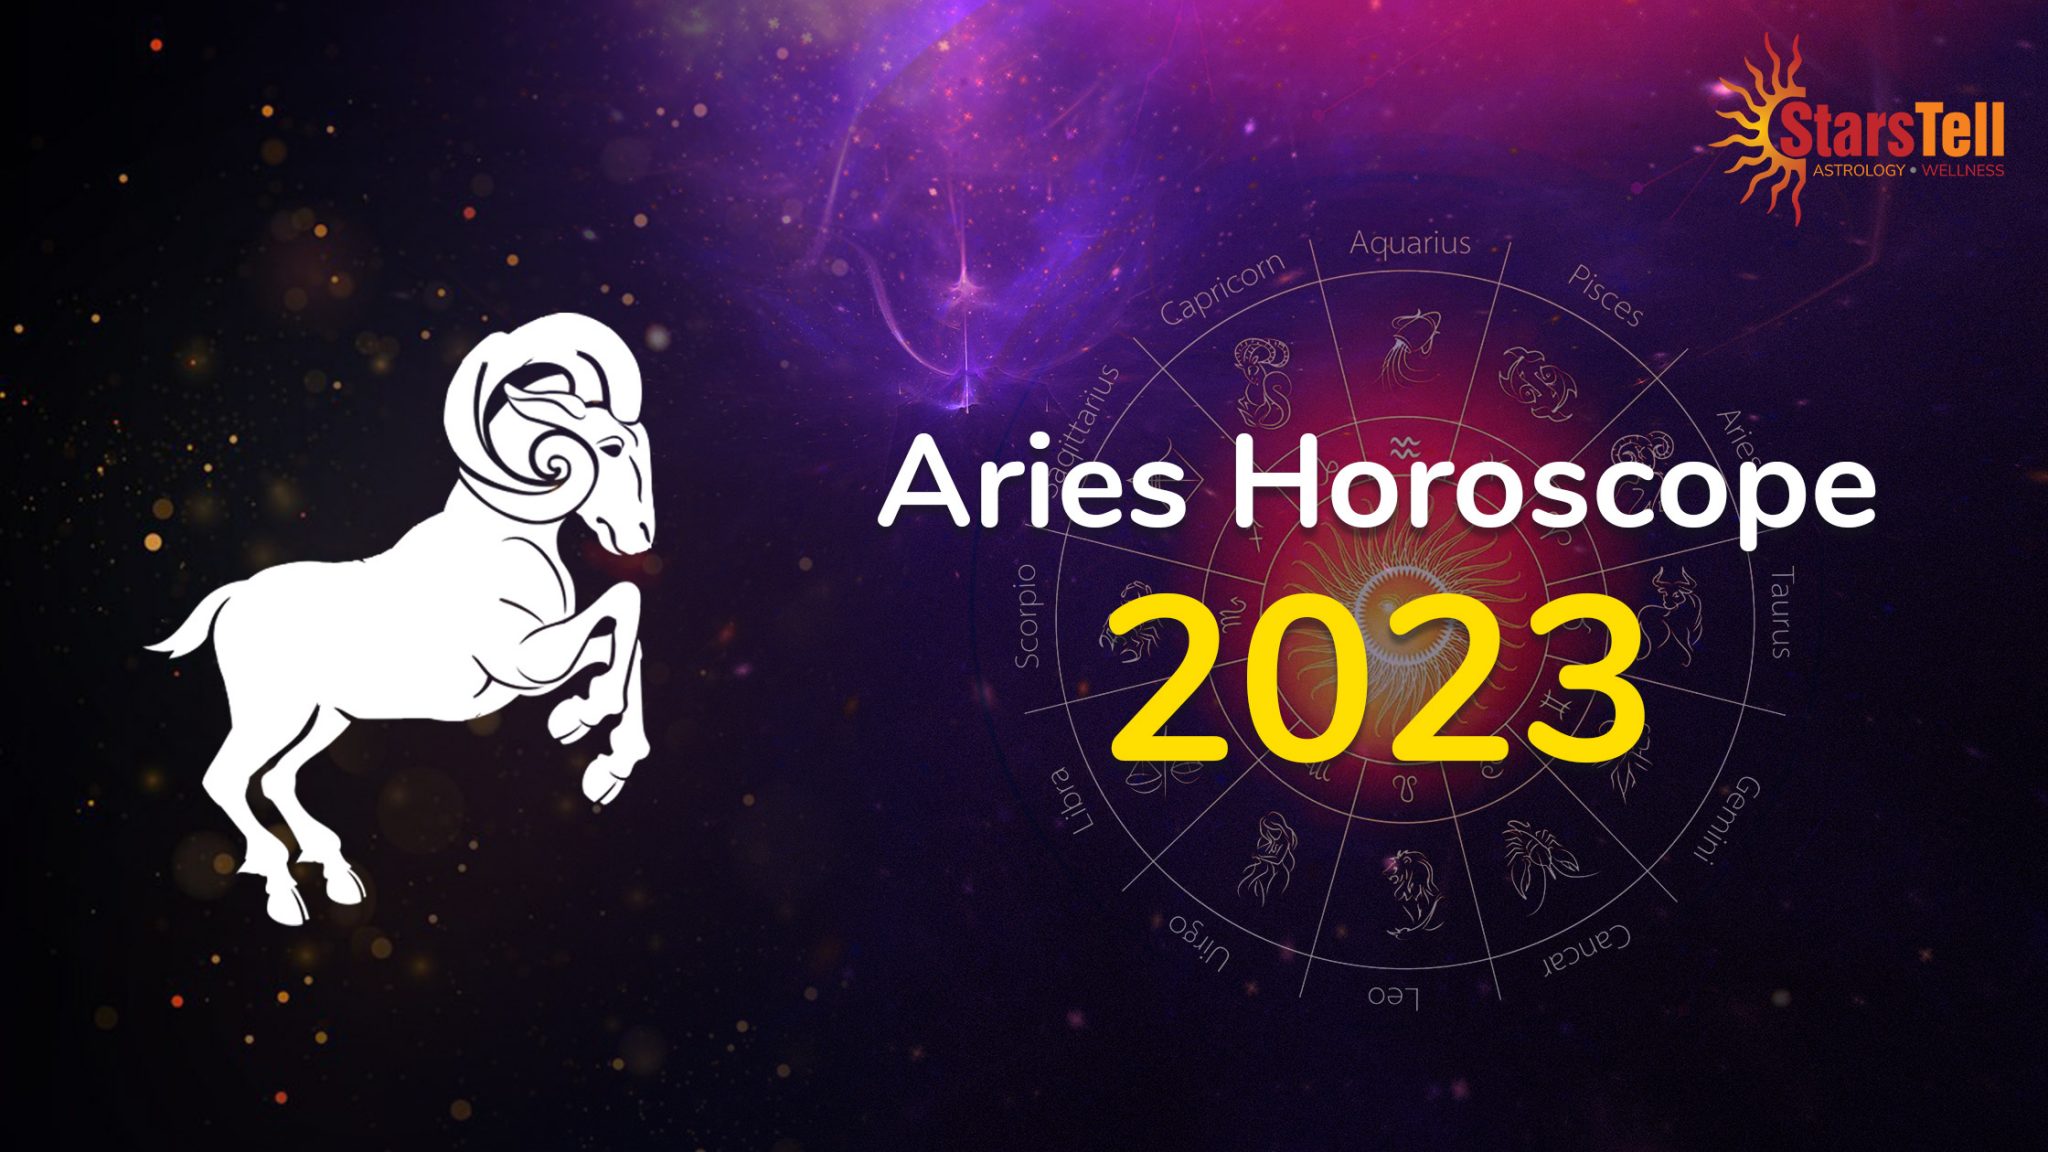 Aries Horoscope 2023: What does 2023 hold for you?